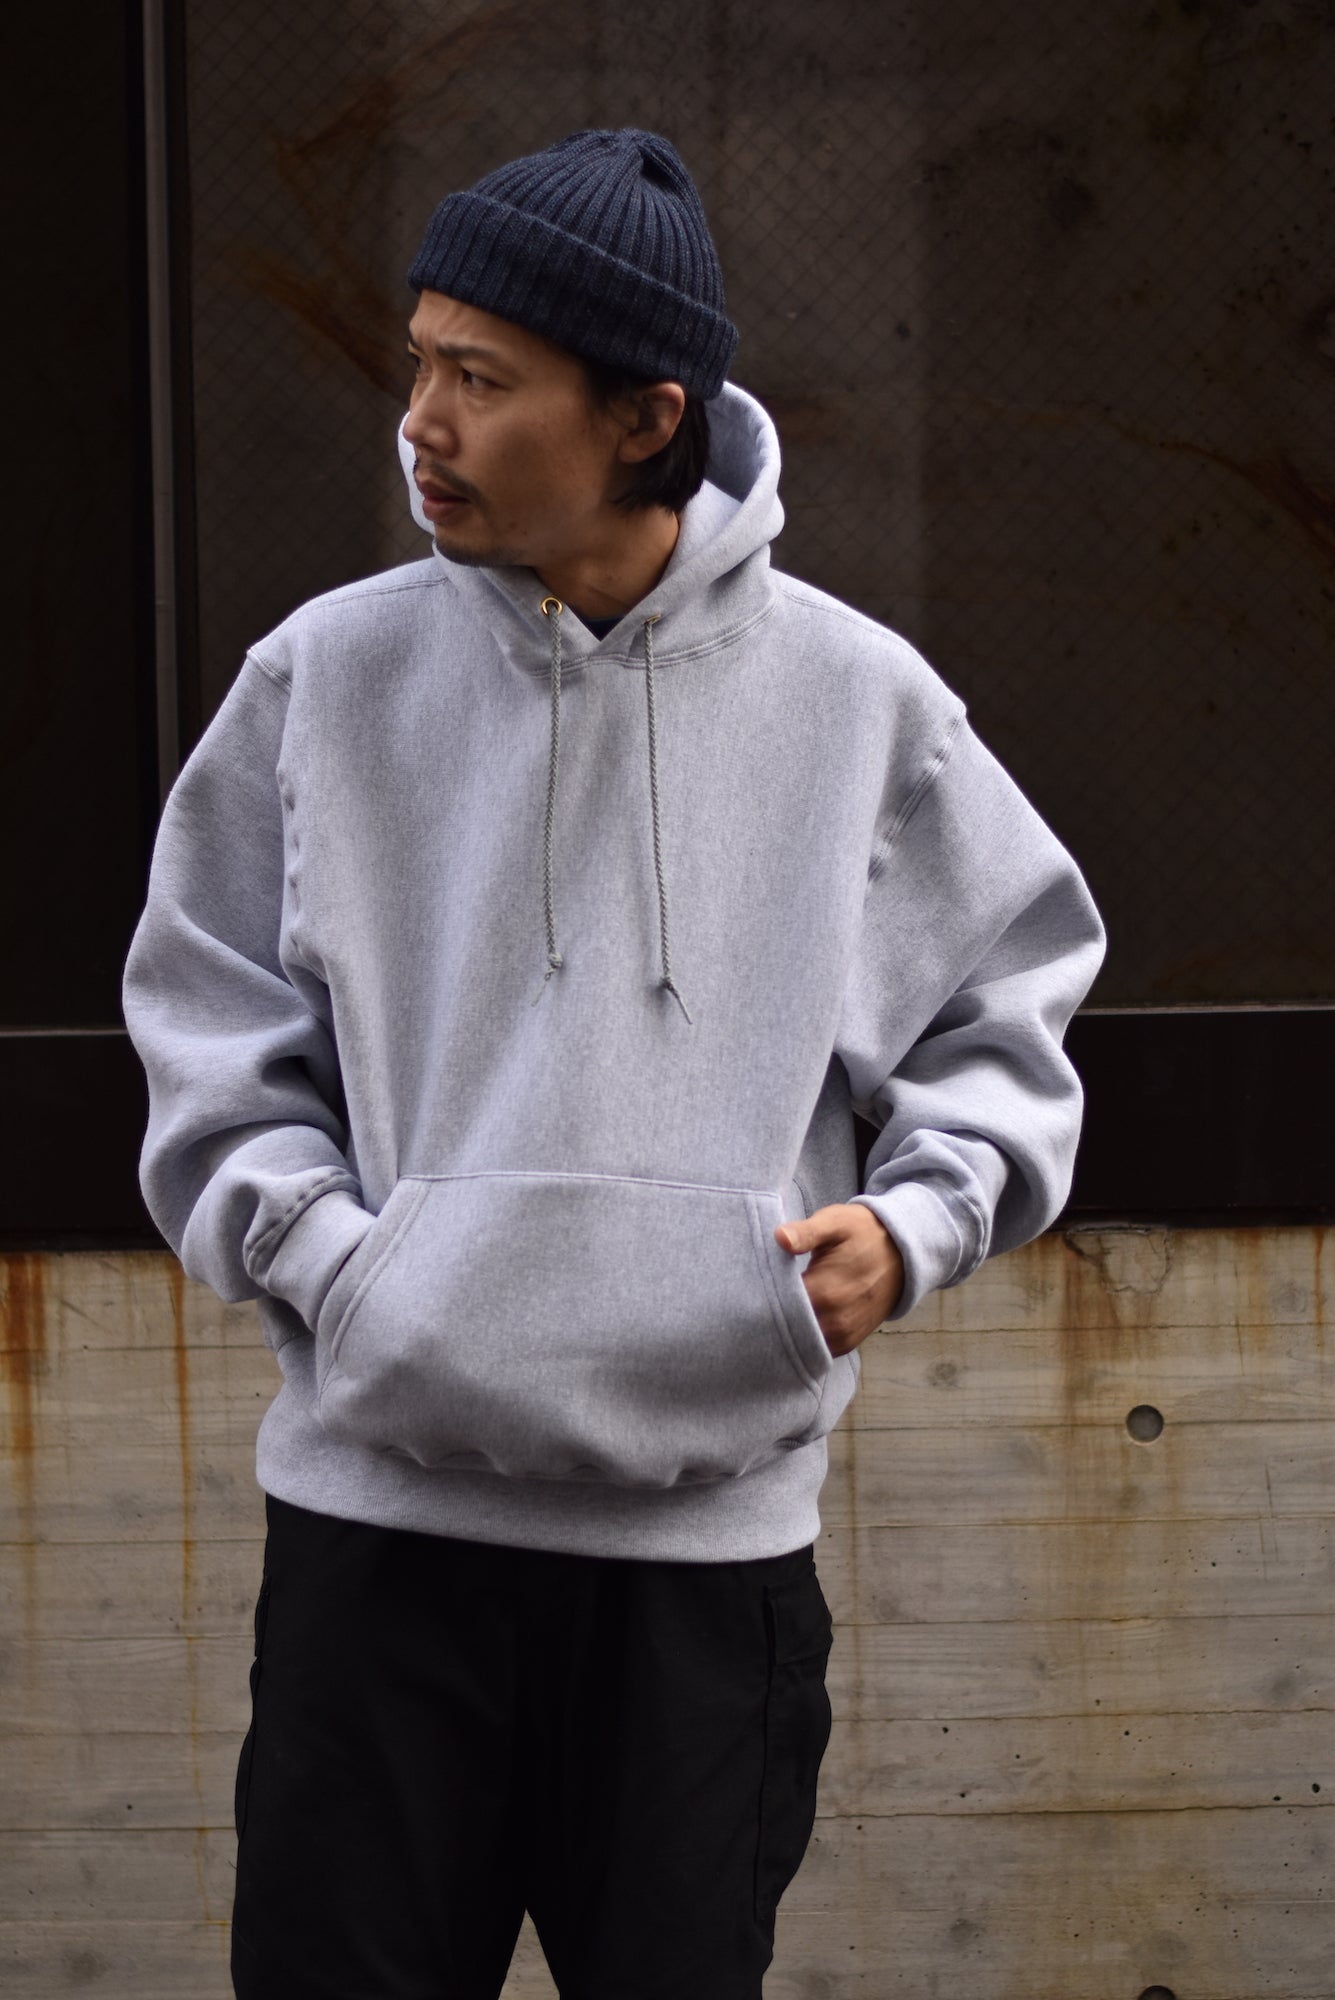 CAMBER】CROSS KNIT PULLOVER HOODED PARKA 着用編 | スマクロ原宿店の ...